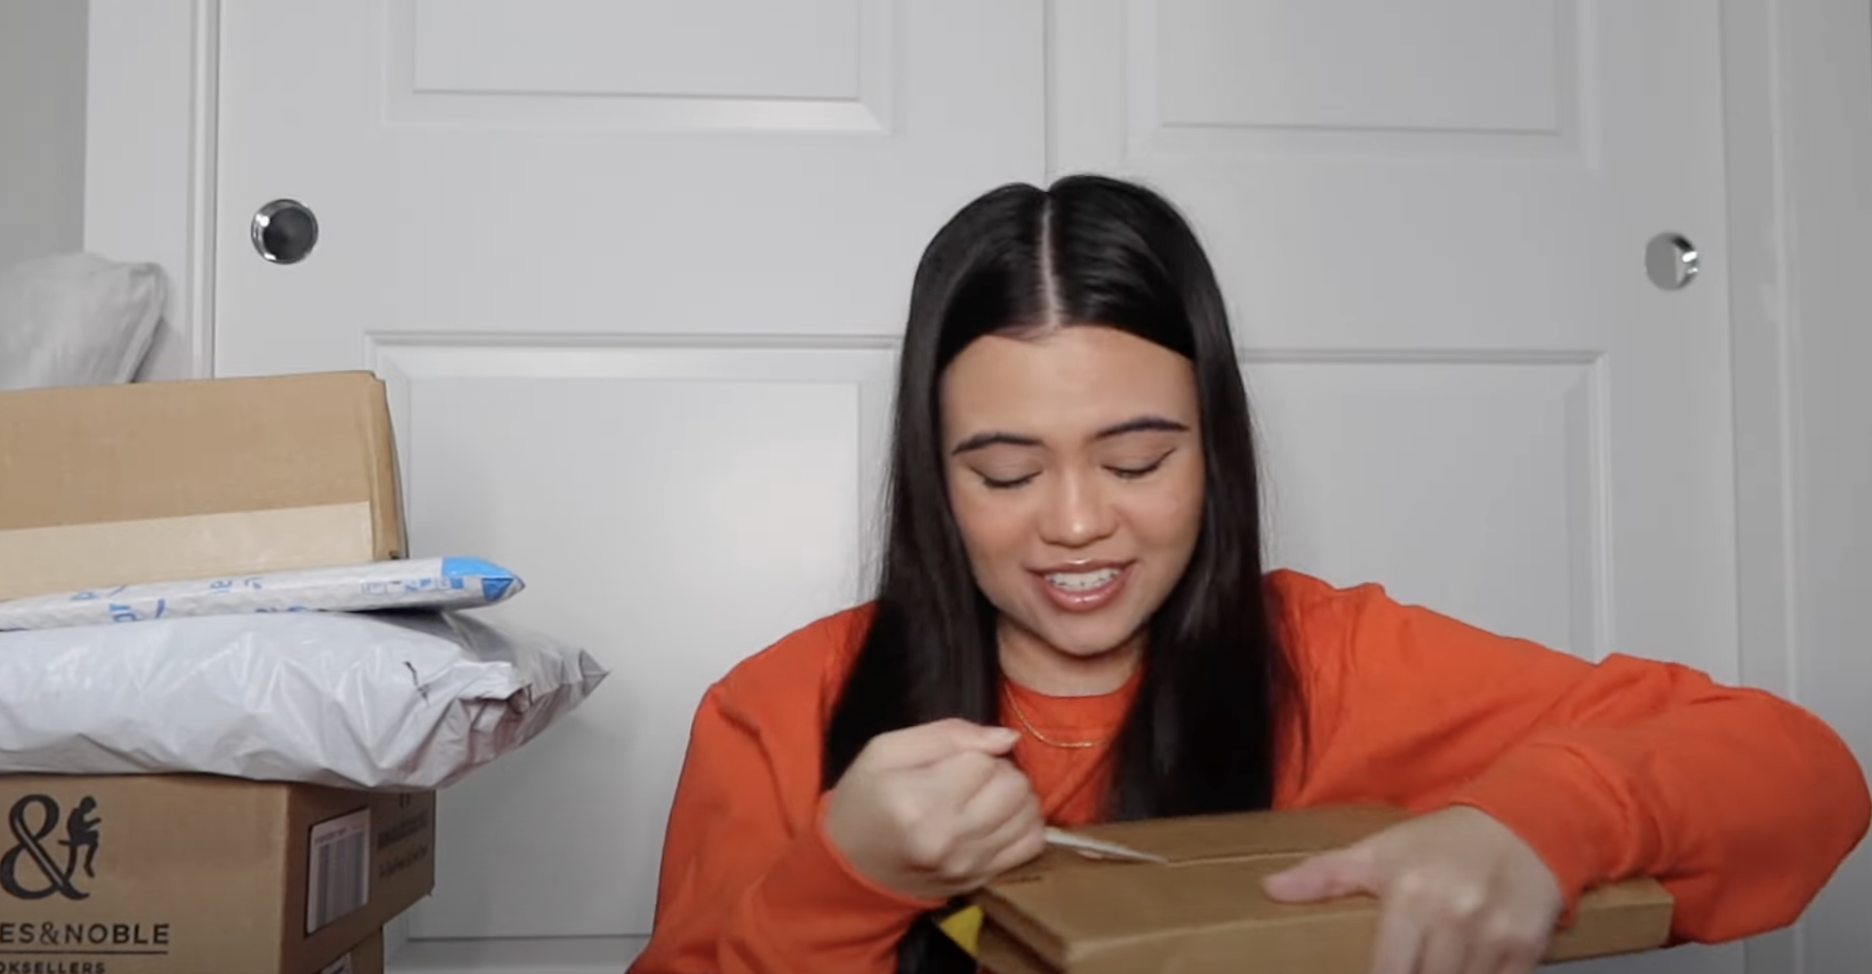 girl opening boxes of books...